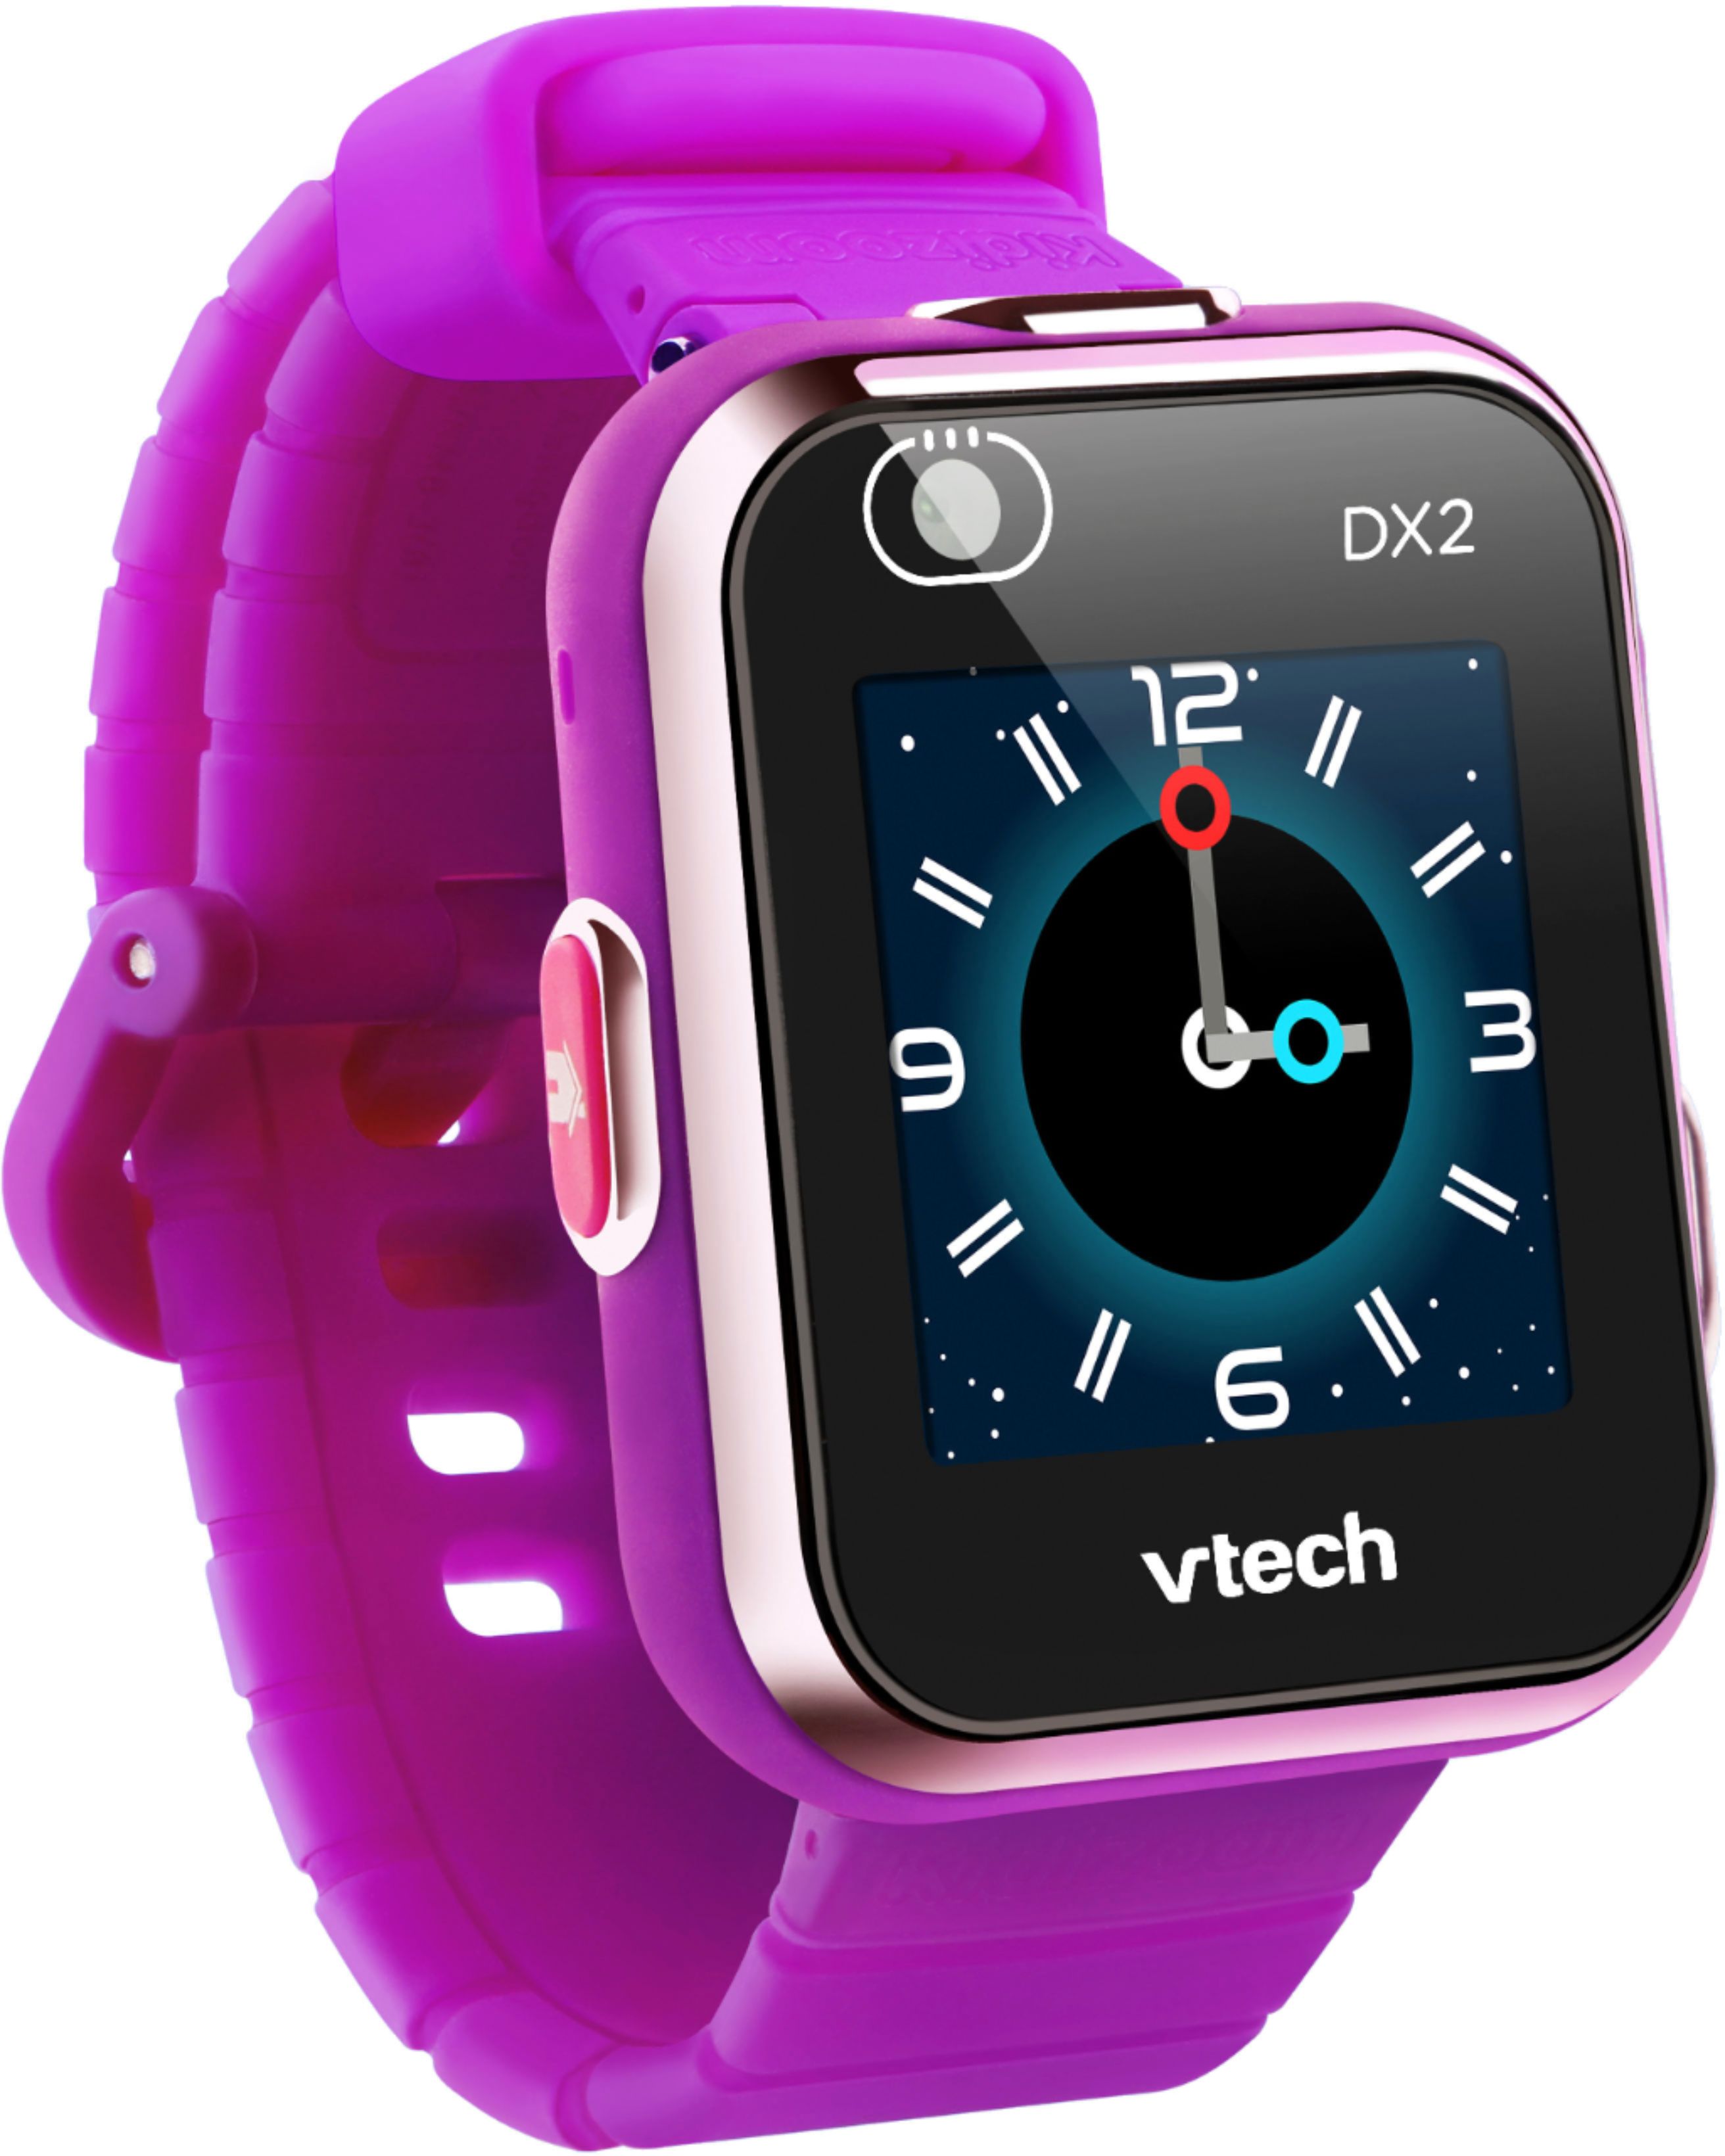 Girls Smartwatch Kidizoom DX2 By Vtech with Instructions